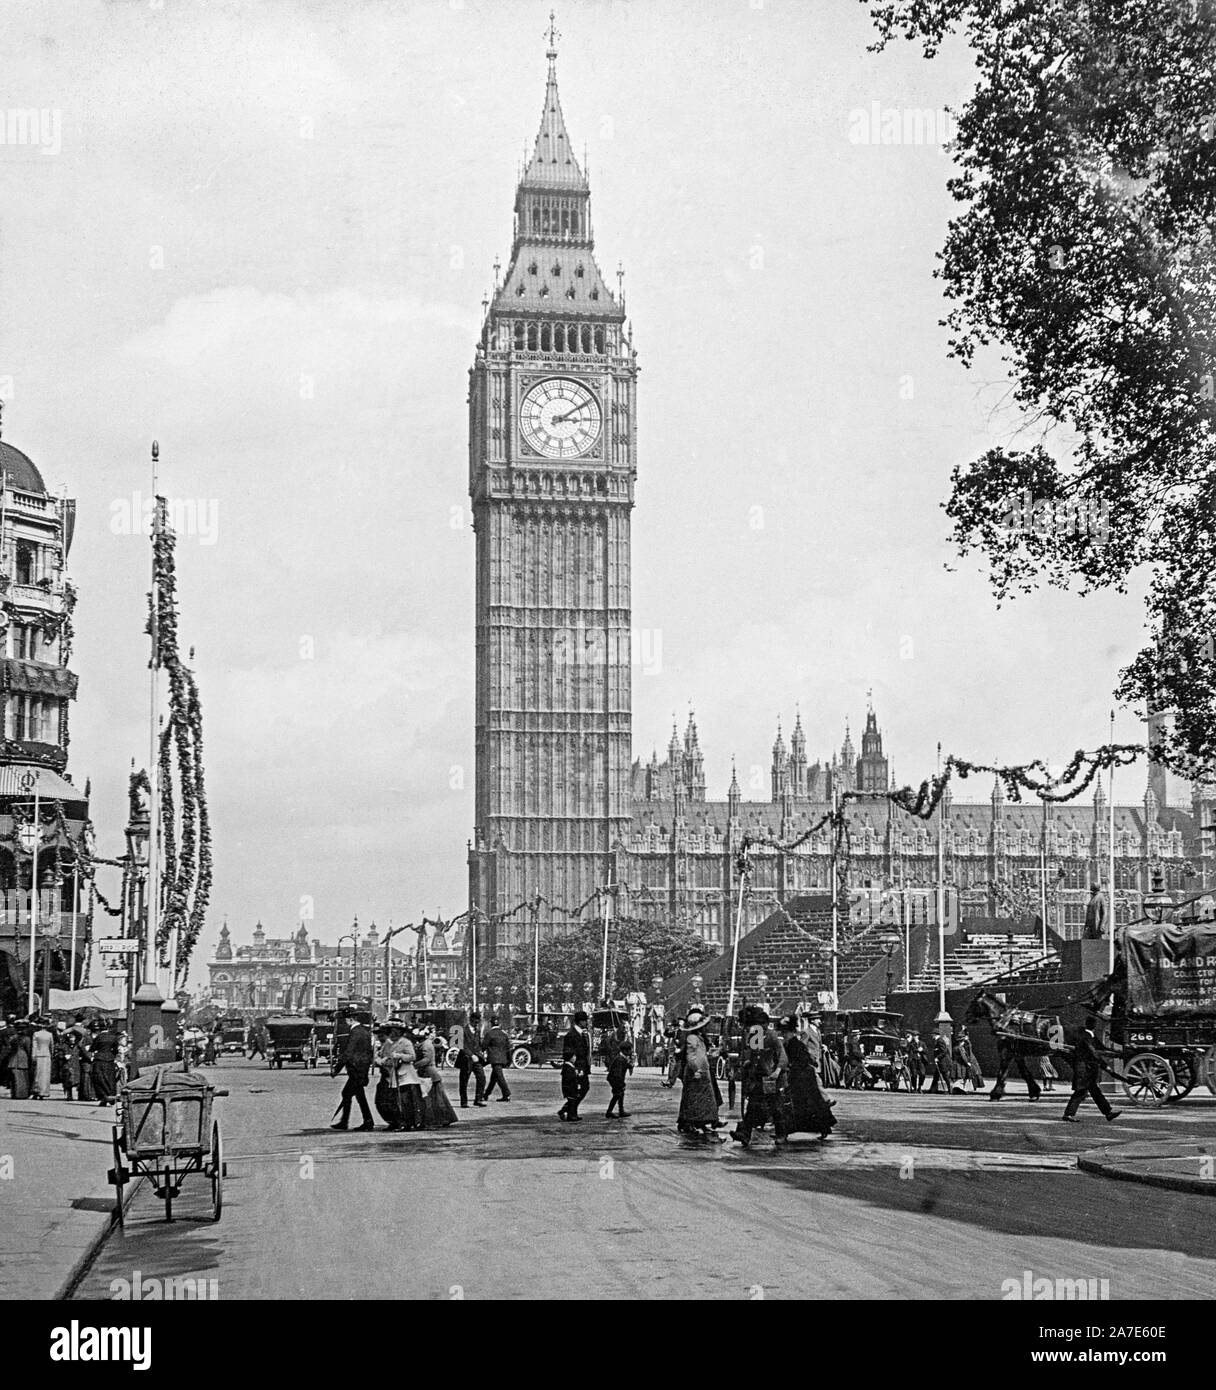 Vintage black and white photograph taken in 1911 showing Big Ben and The Houses Of Parliament in London, with flags and decorations for the Coronation Of King George V. Stock Photo